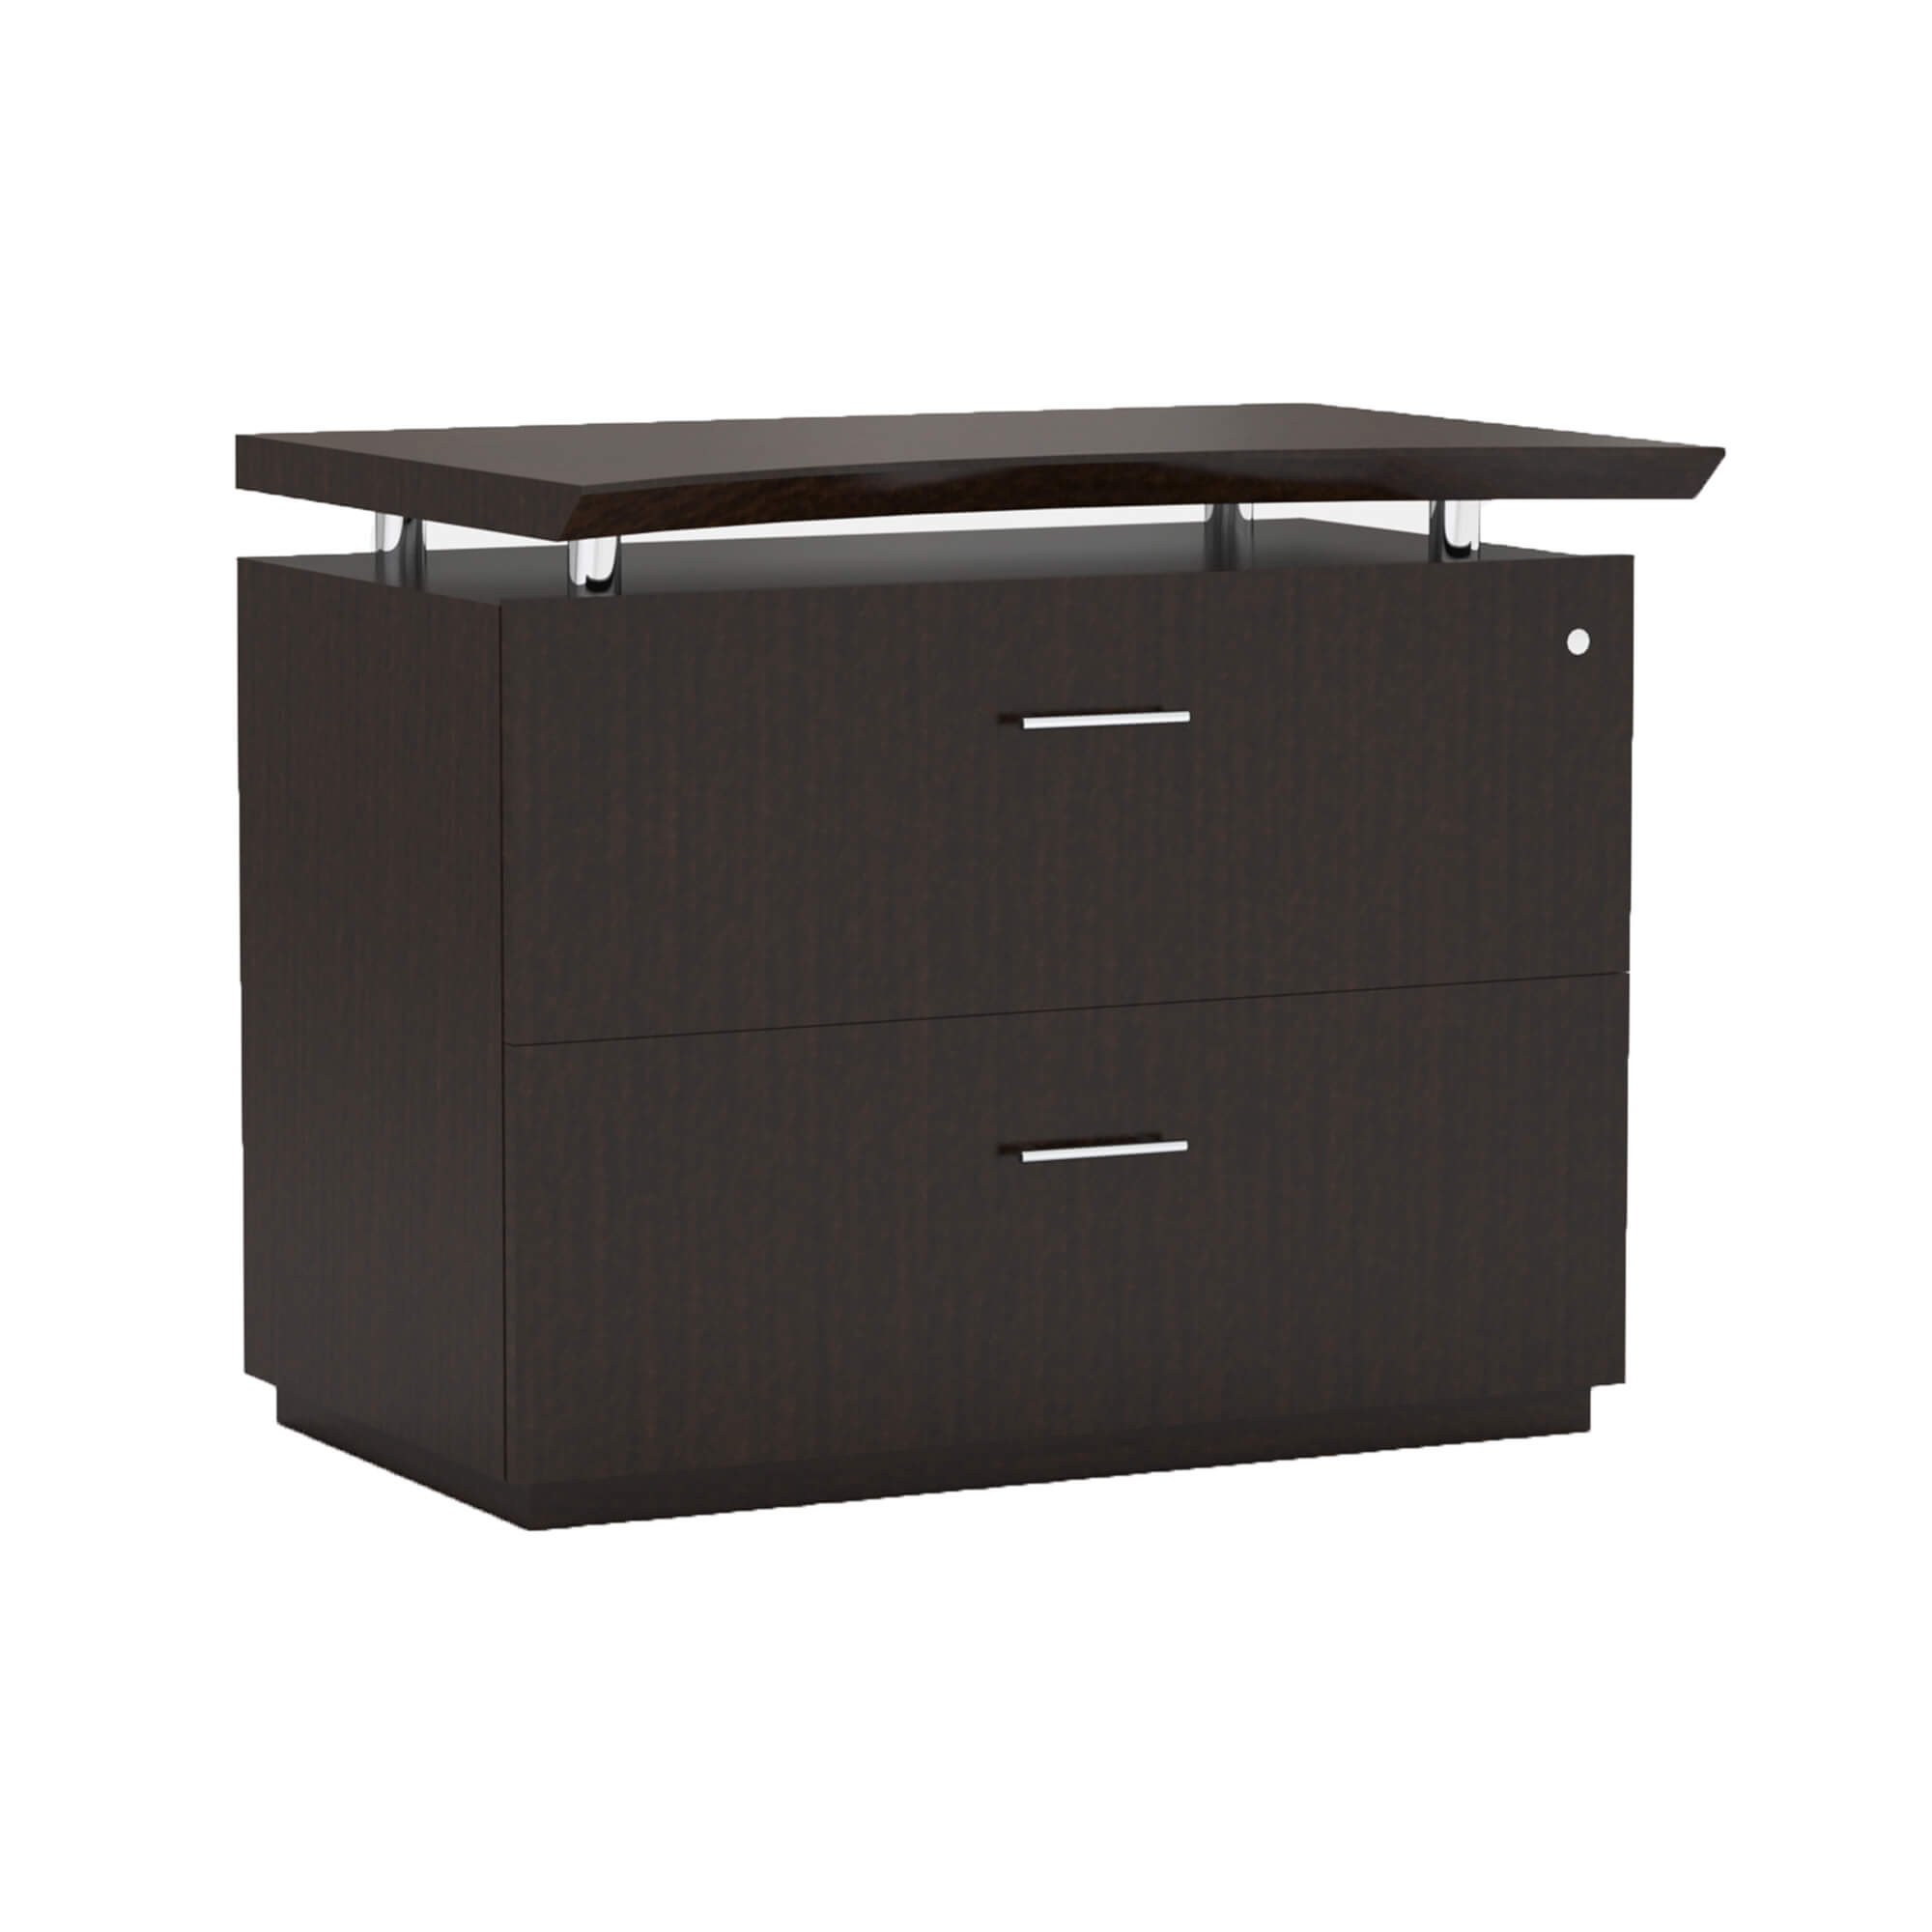 conference-room-tables-lateral-file-36-inch-1-2-3.jpg